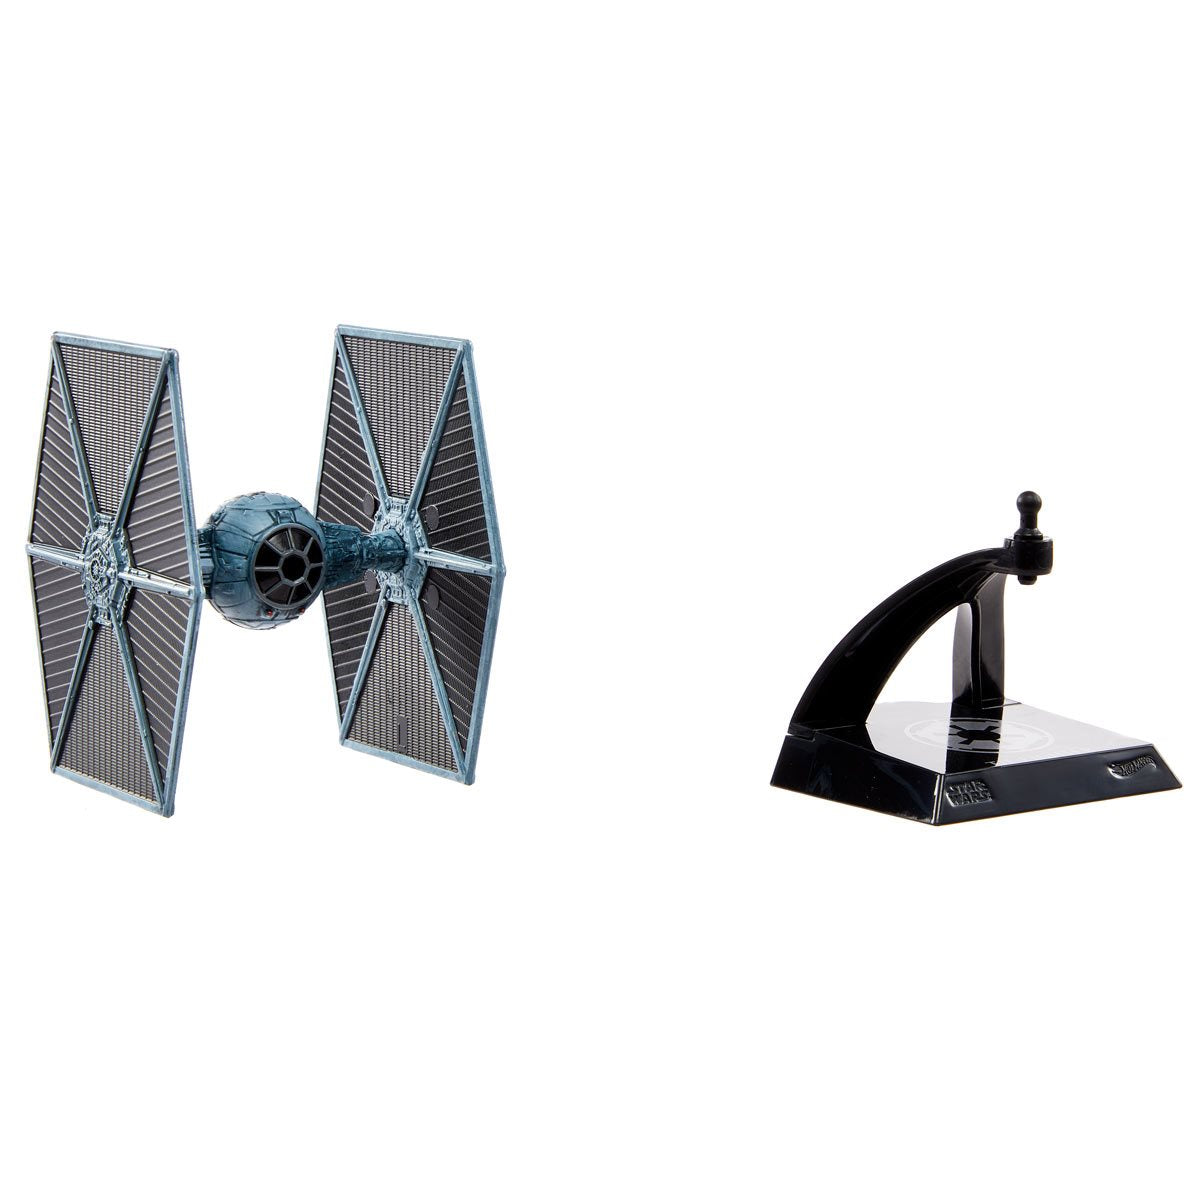 Hot Wheels Star Wars Starships Select, Premium Replica of Tie Fighter, Moveable Parts, Premium Stand